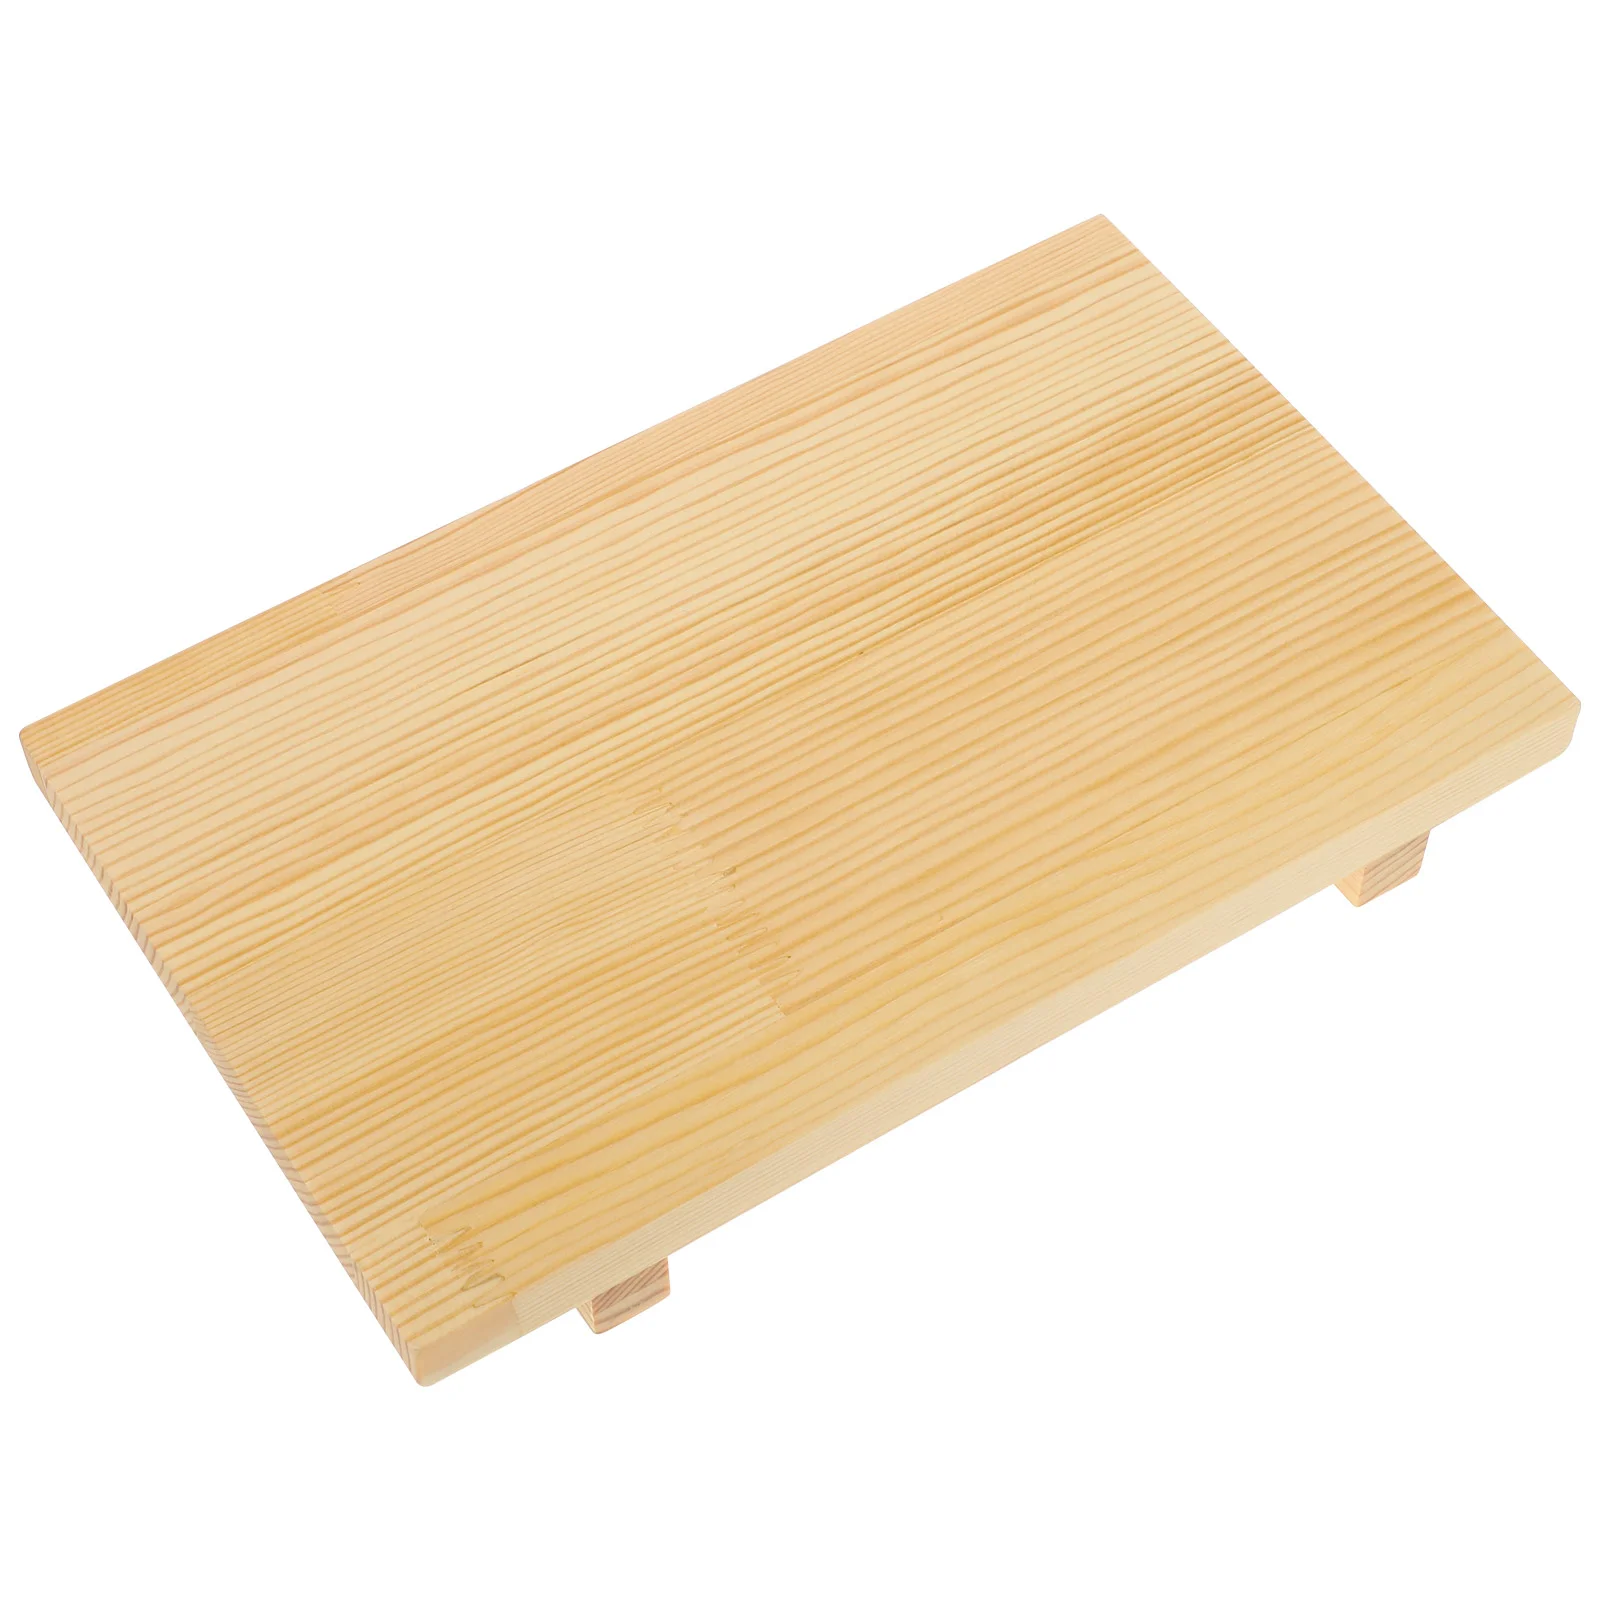 

Sushi Plate Serving Tray Board Platter Plates Sashimi Japanese Wood Geta Bamboo Wooden Cheese Boat Holder Party Tableware